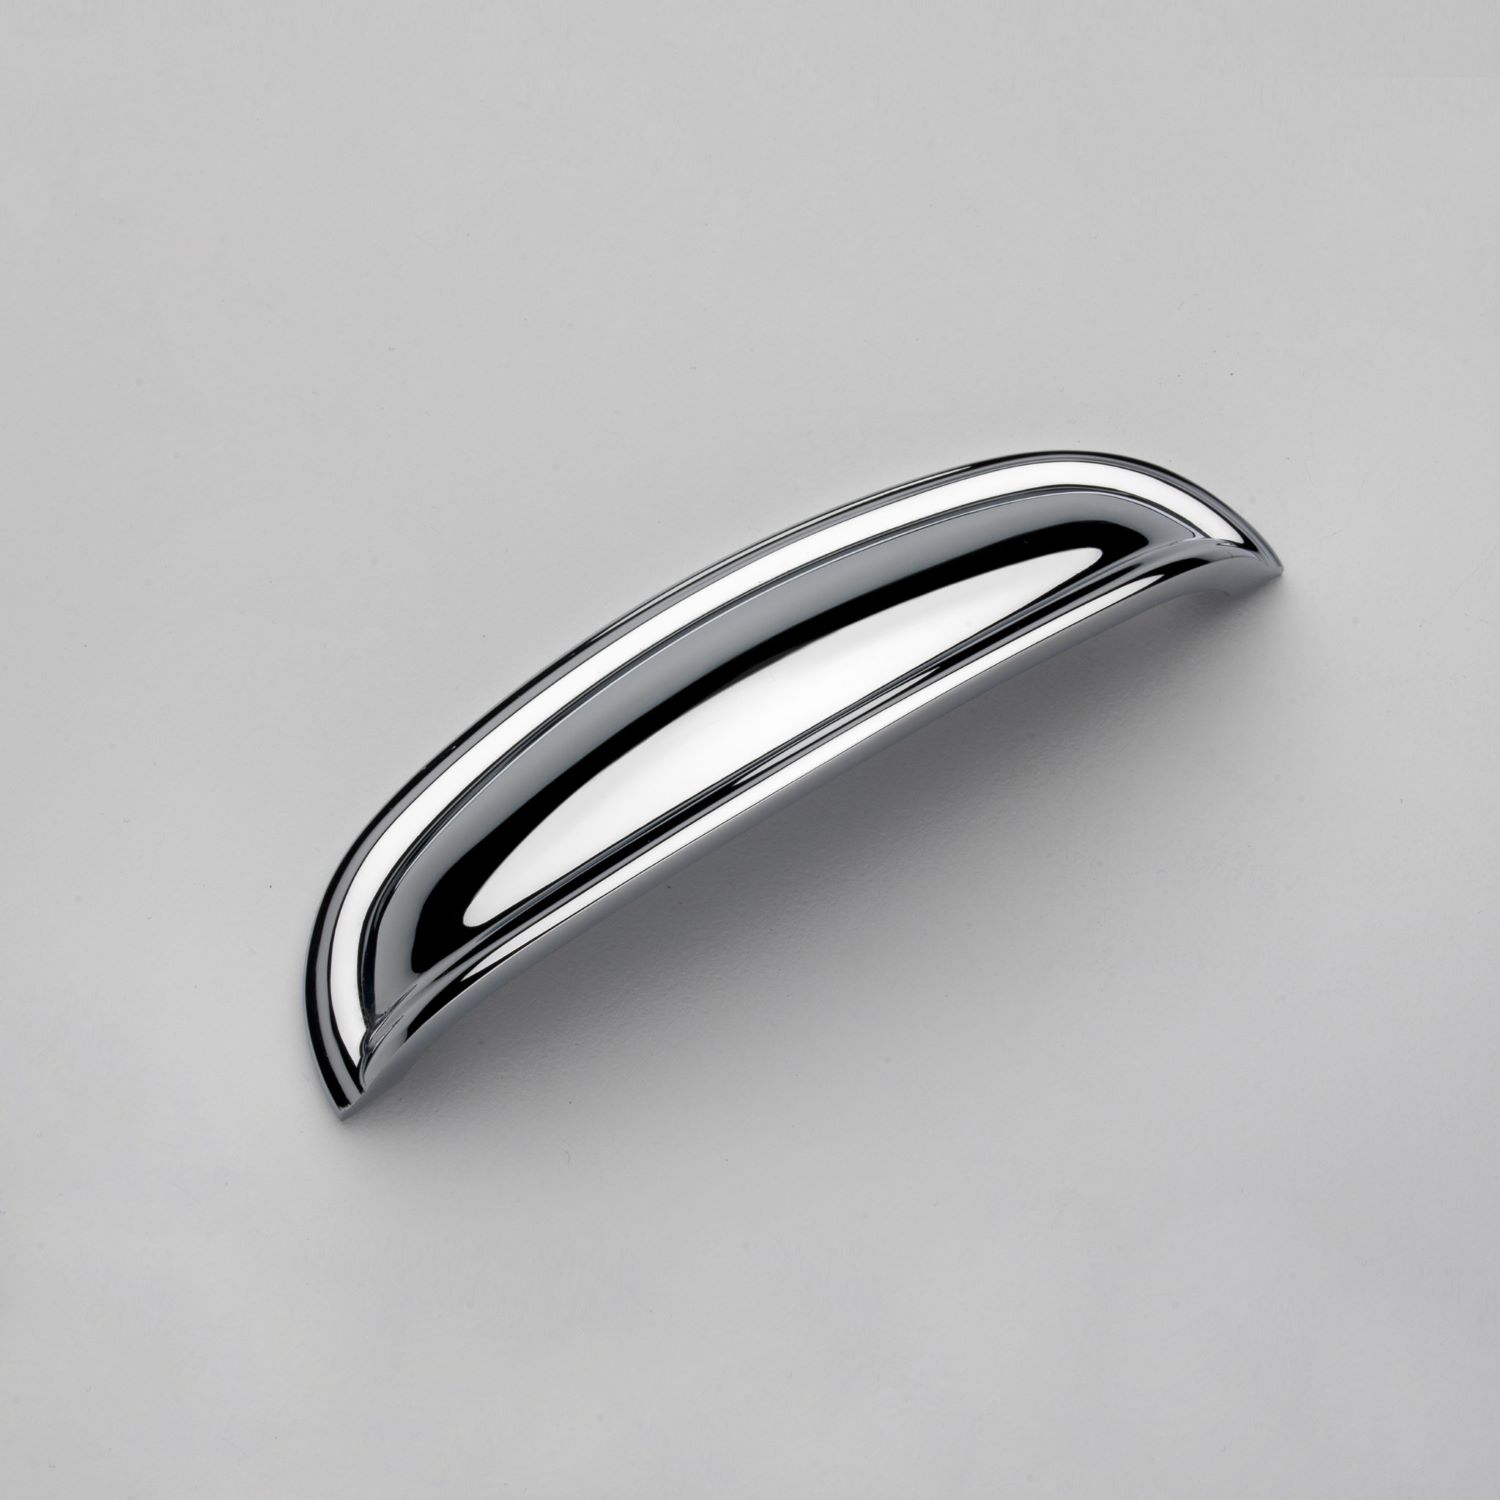 The Knightsbridge cabinet handle range from Crofts & Assinder's Special Works Collection